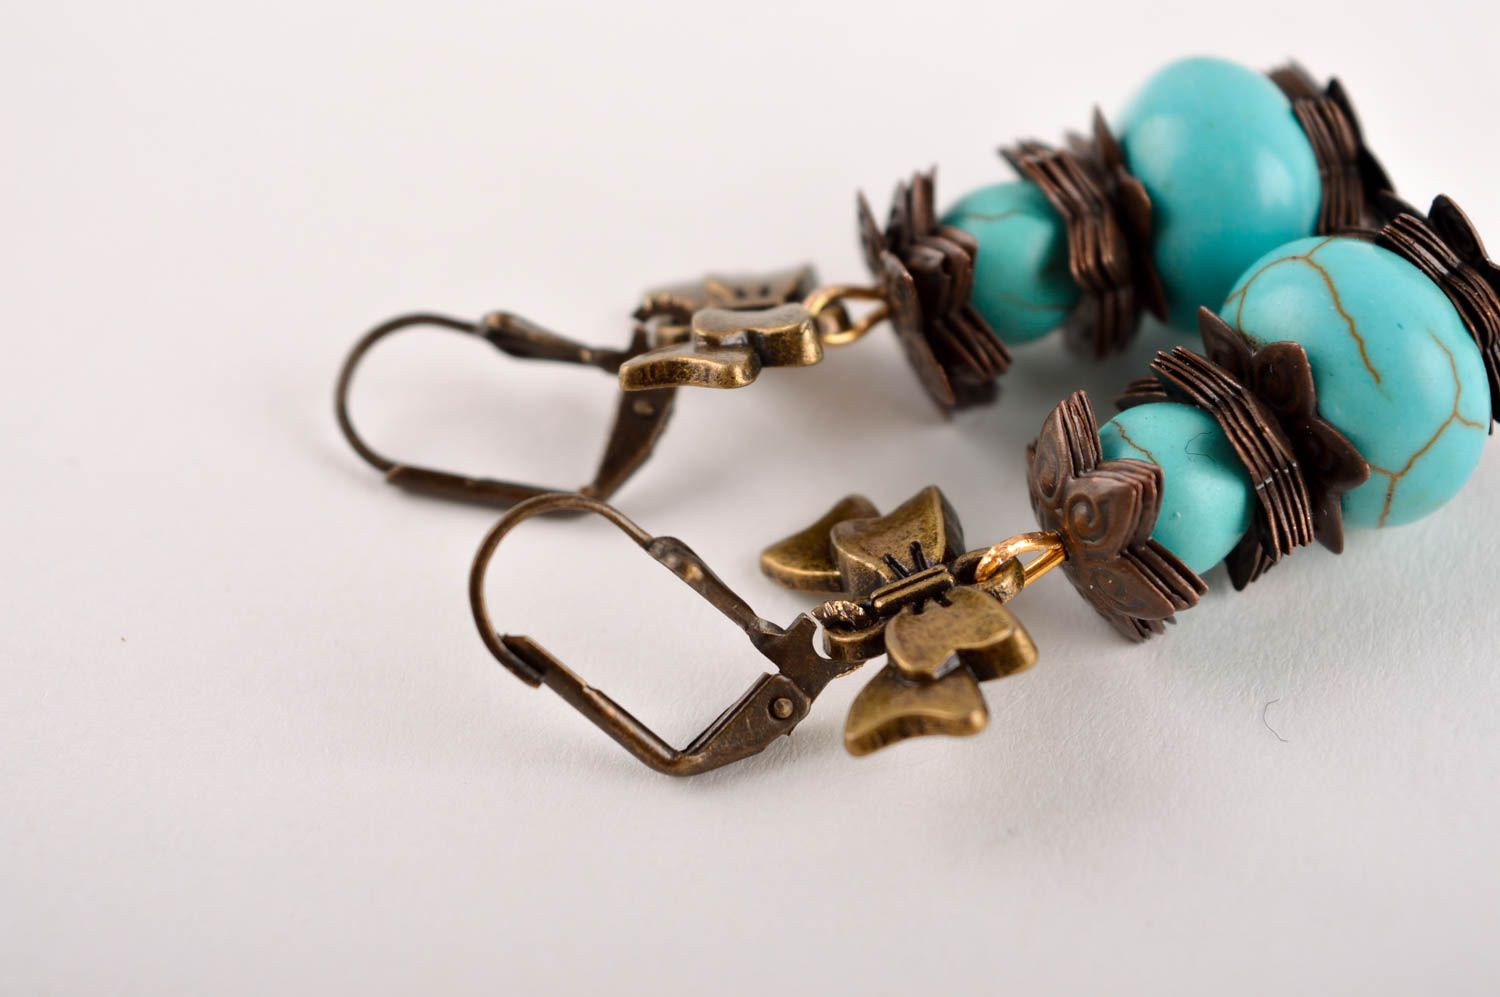 Homemade jewelry designer earrings turquoise earrings cool jewelry gifts for her photo 5